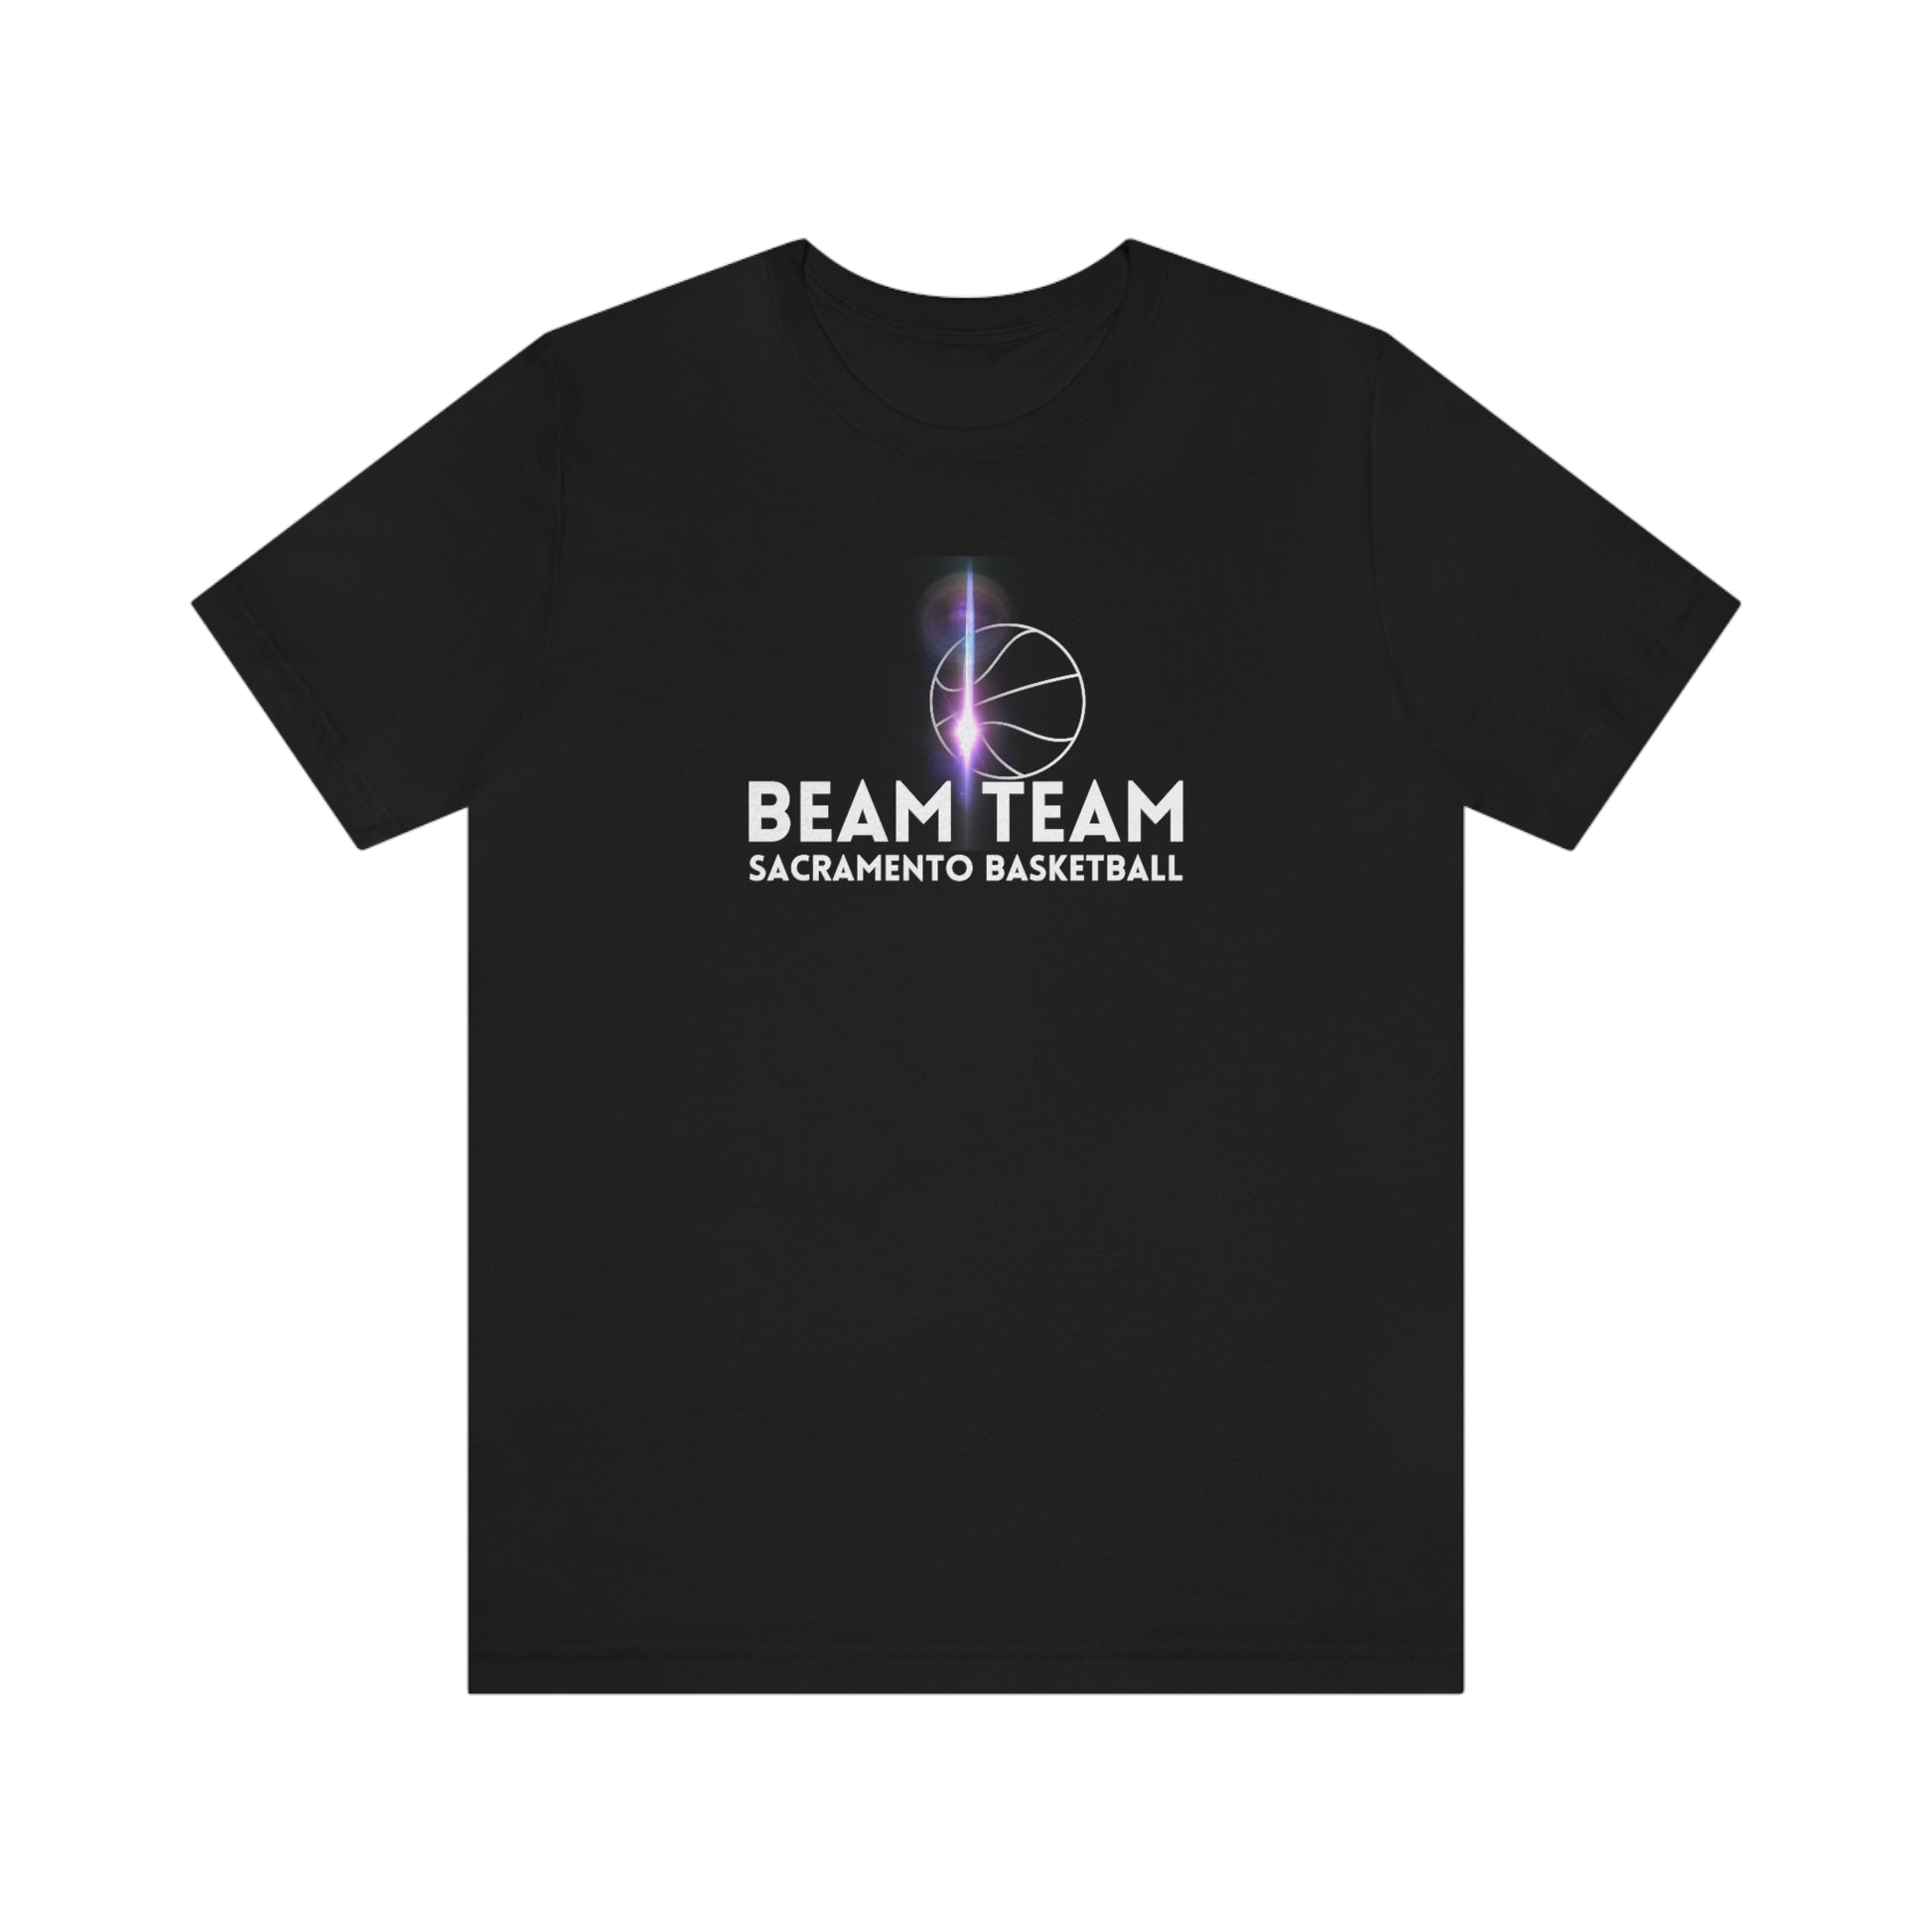 Beam Team Kings Basketball Unisex T-Shirt, Beam Team, Light the Beam! Celebrate another W - win - for your Kings Basketball team in this comfortable, cool t-shirt.